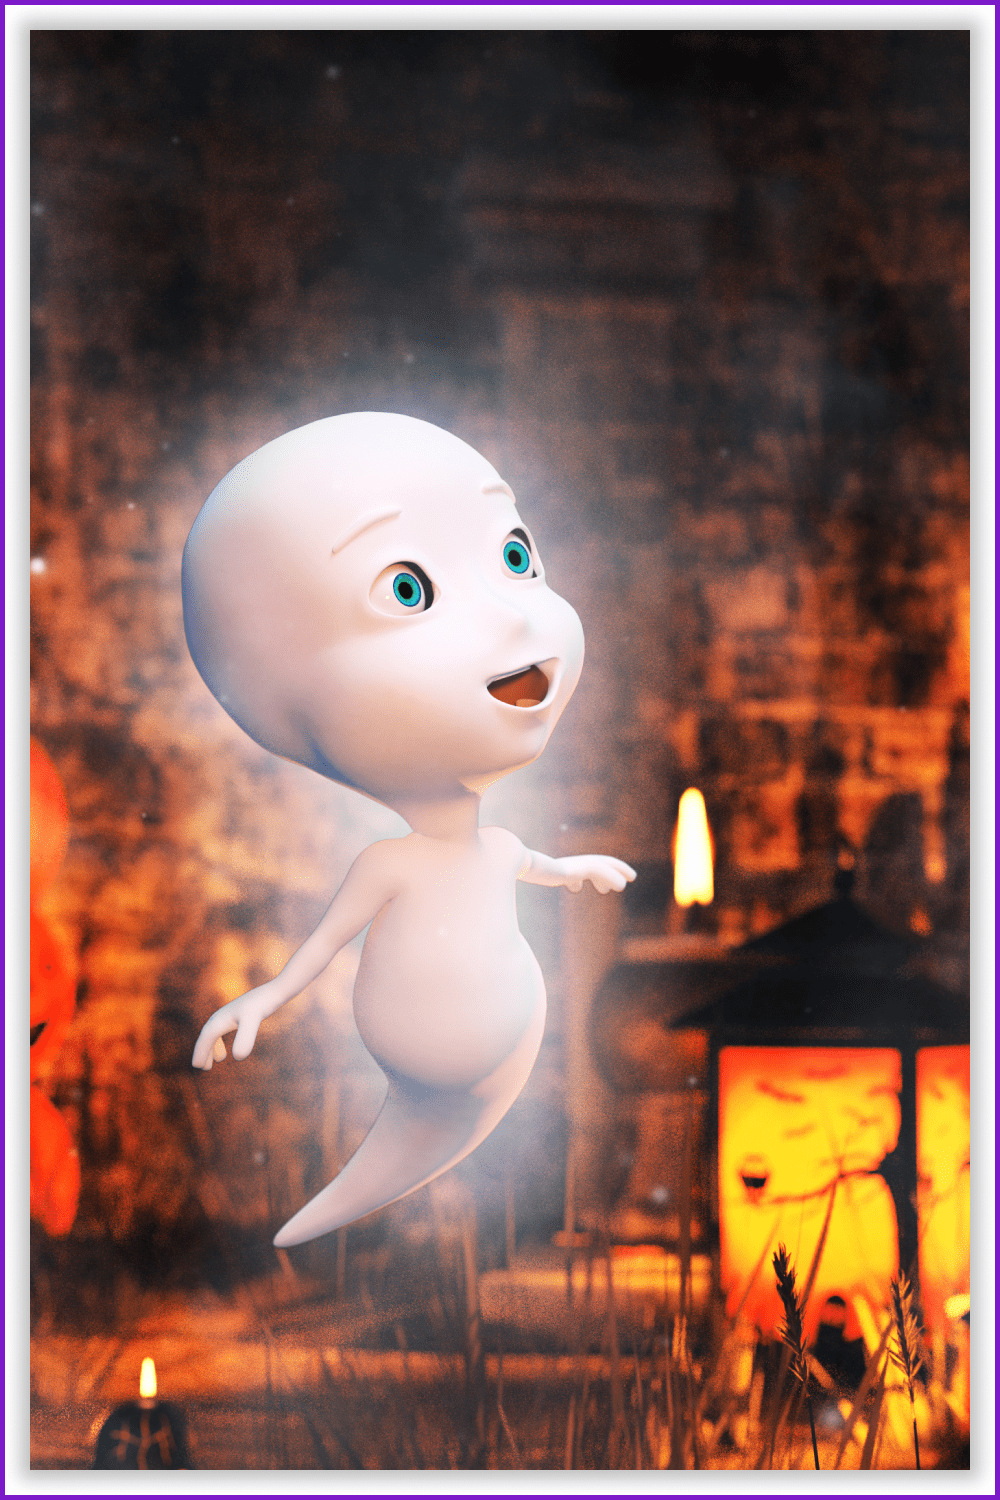 White ghost against the background of orange lamps.